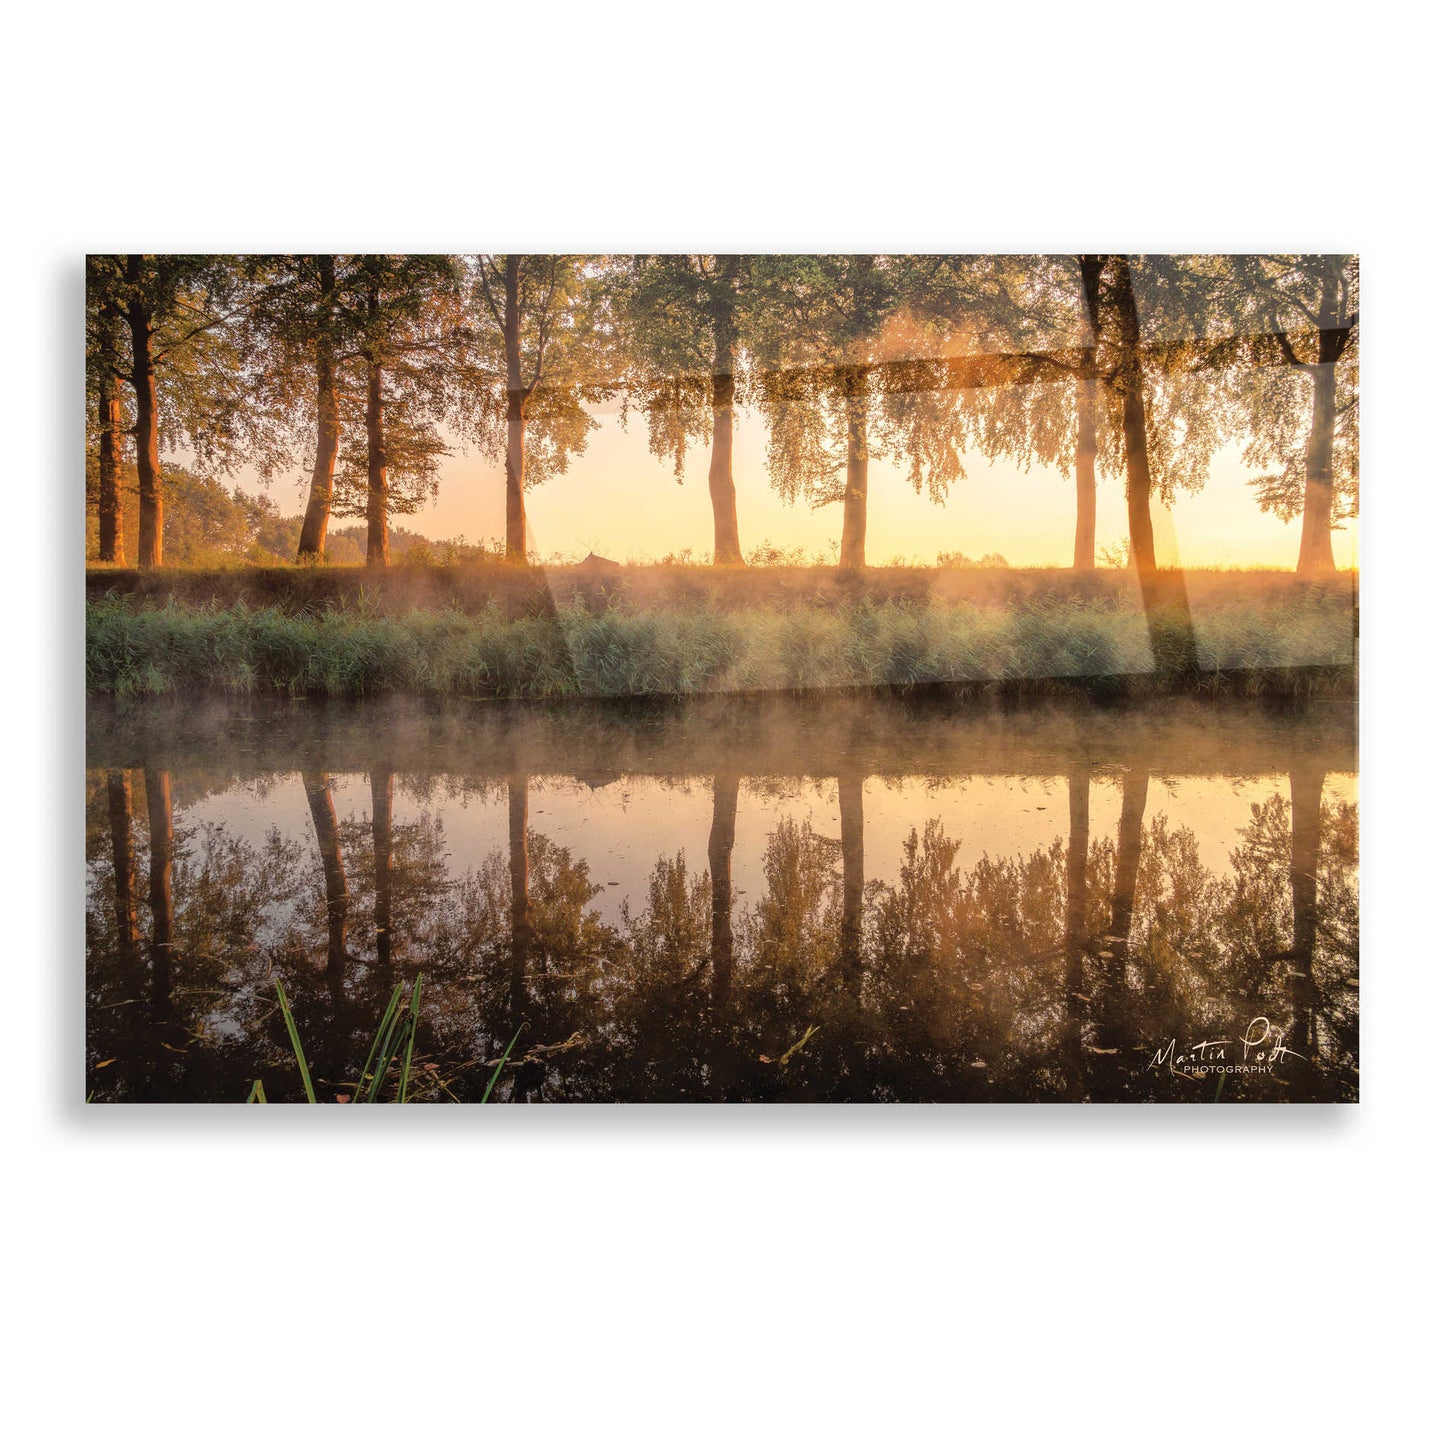 Epic Art 'Sunrise in the Netherlands' by Martin Podt, Acrylic Glass Wall Art,16x12